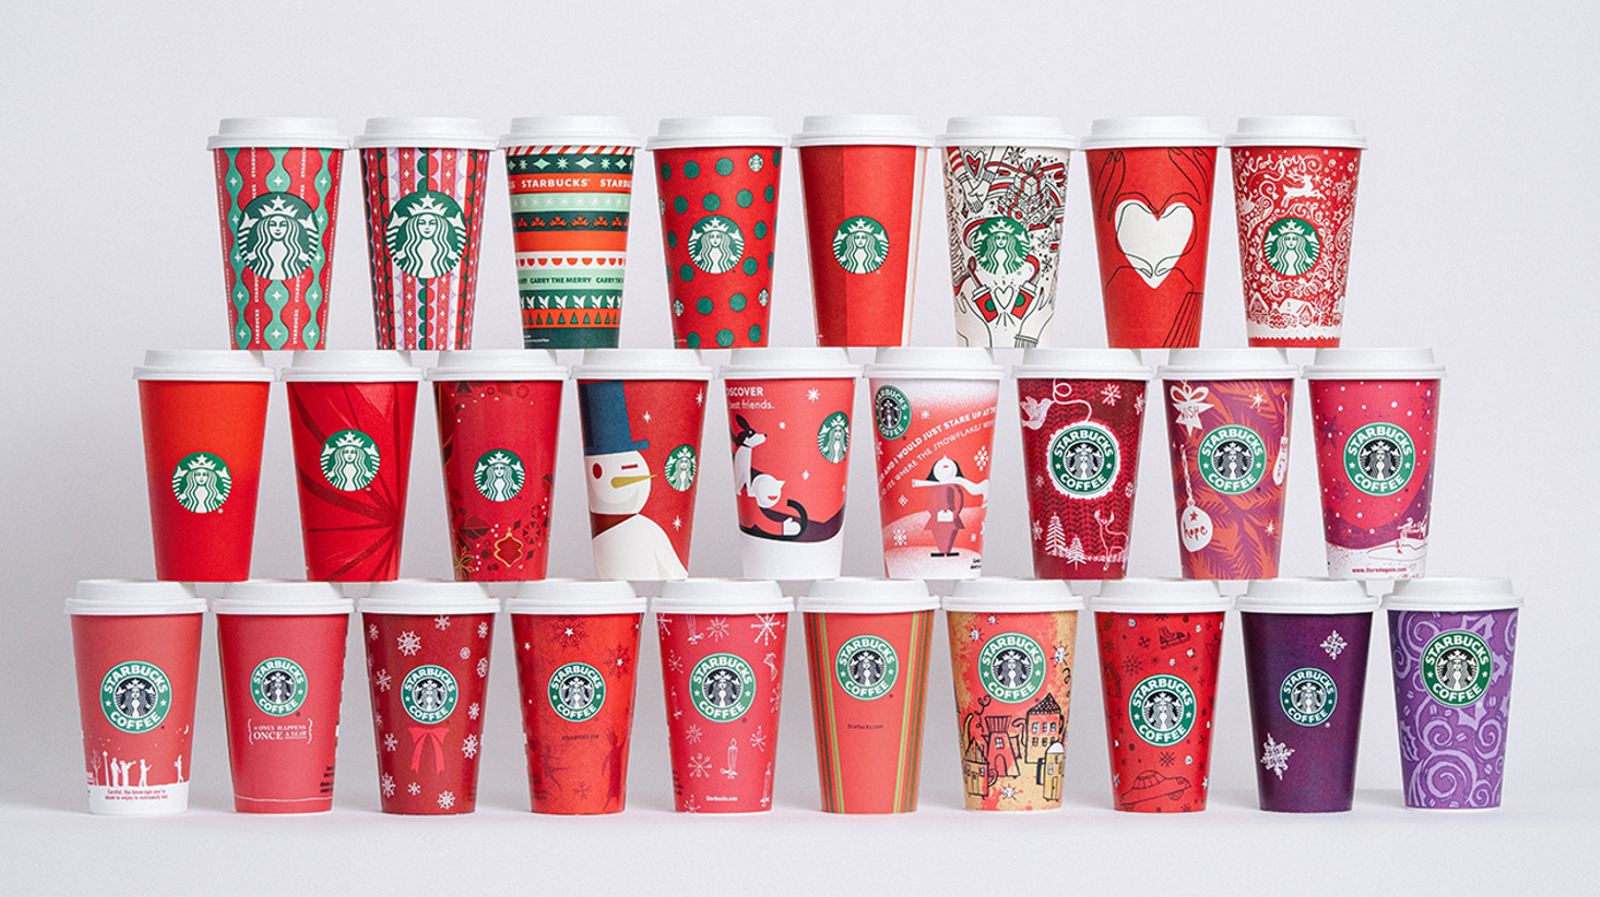 https://www.tastingtable.com/img/gallery/starbucks-iconic-red-cups-are-returning-for-the-2022-holiday-season/l-intro-1667405200.jpg